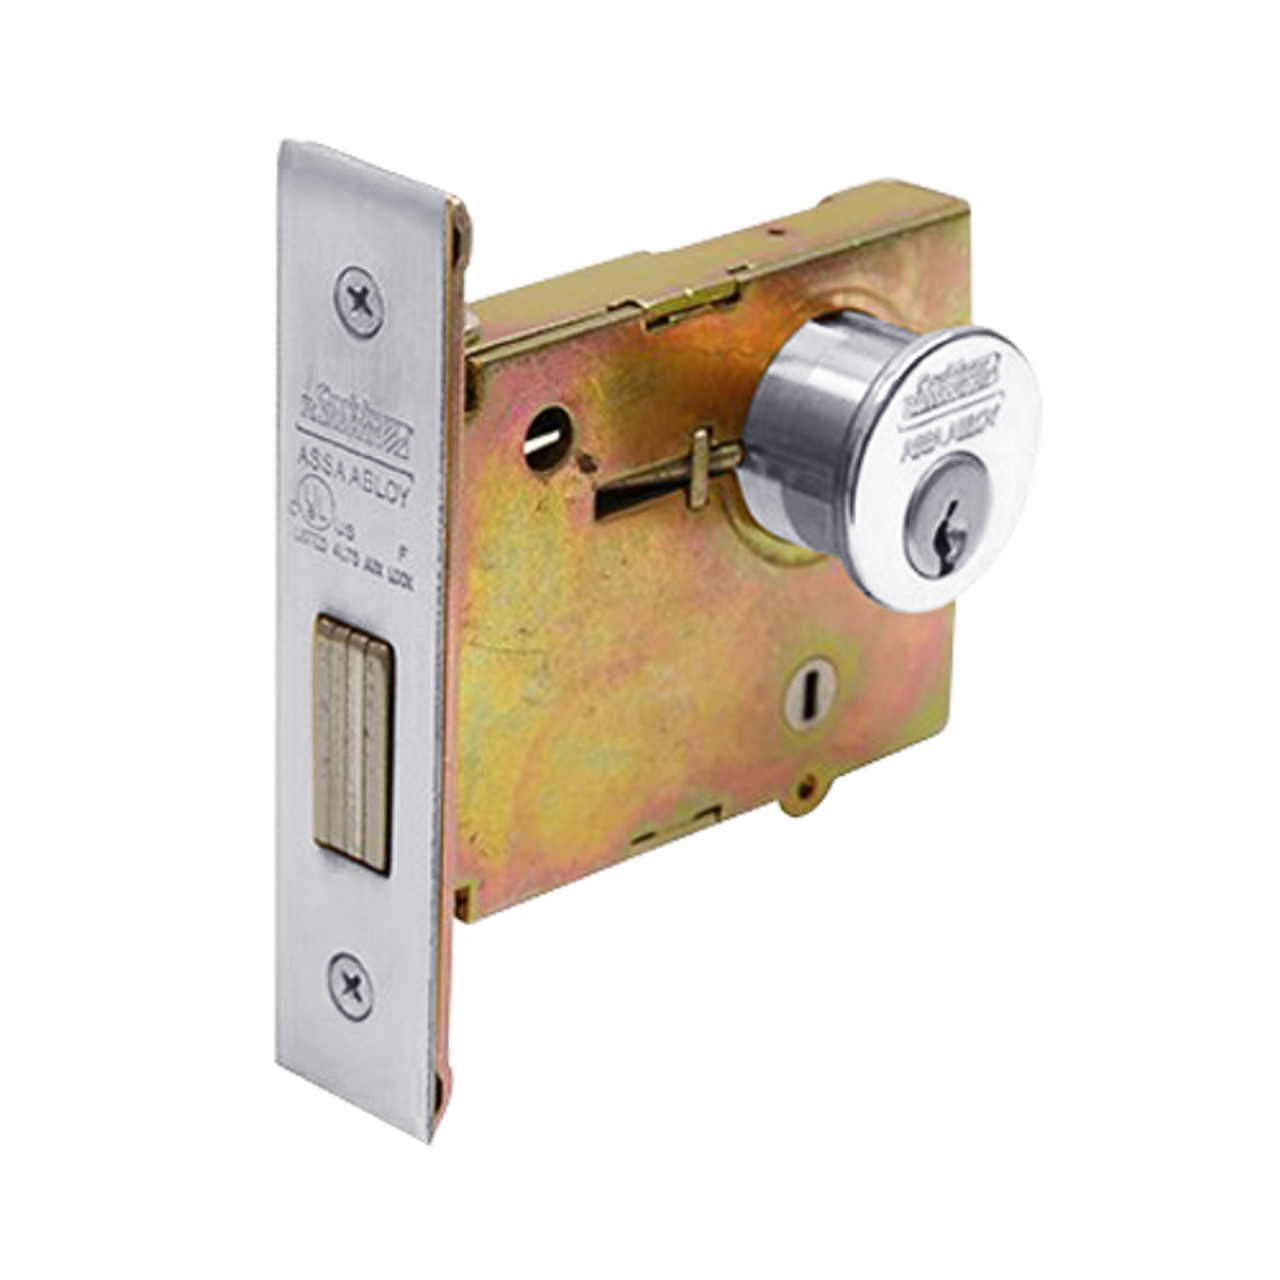 DL4113-625 Corbin DL4100 Series Mortise Deadlocks with Single Cylinder in Bright Chrome Finish